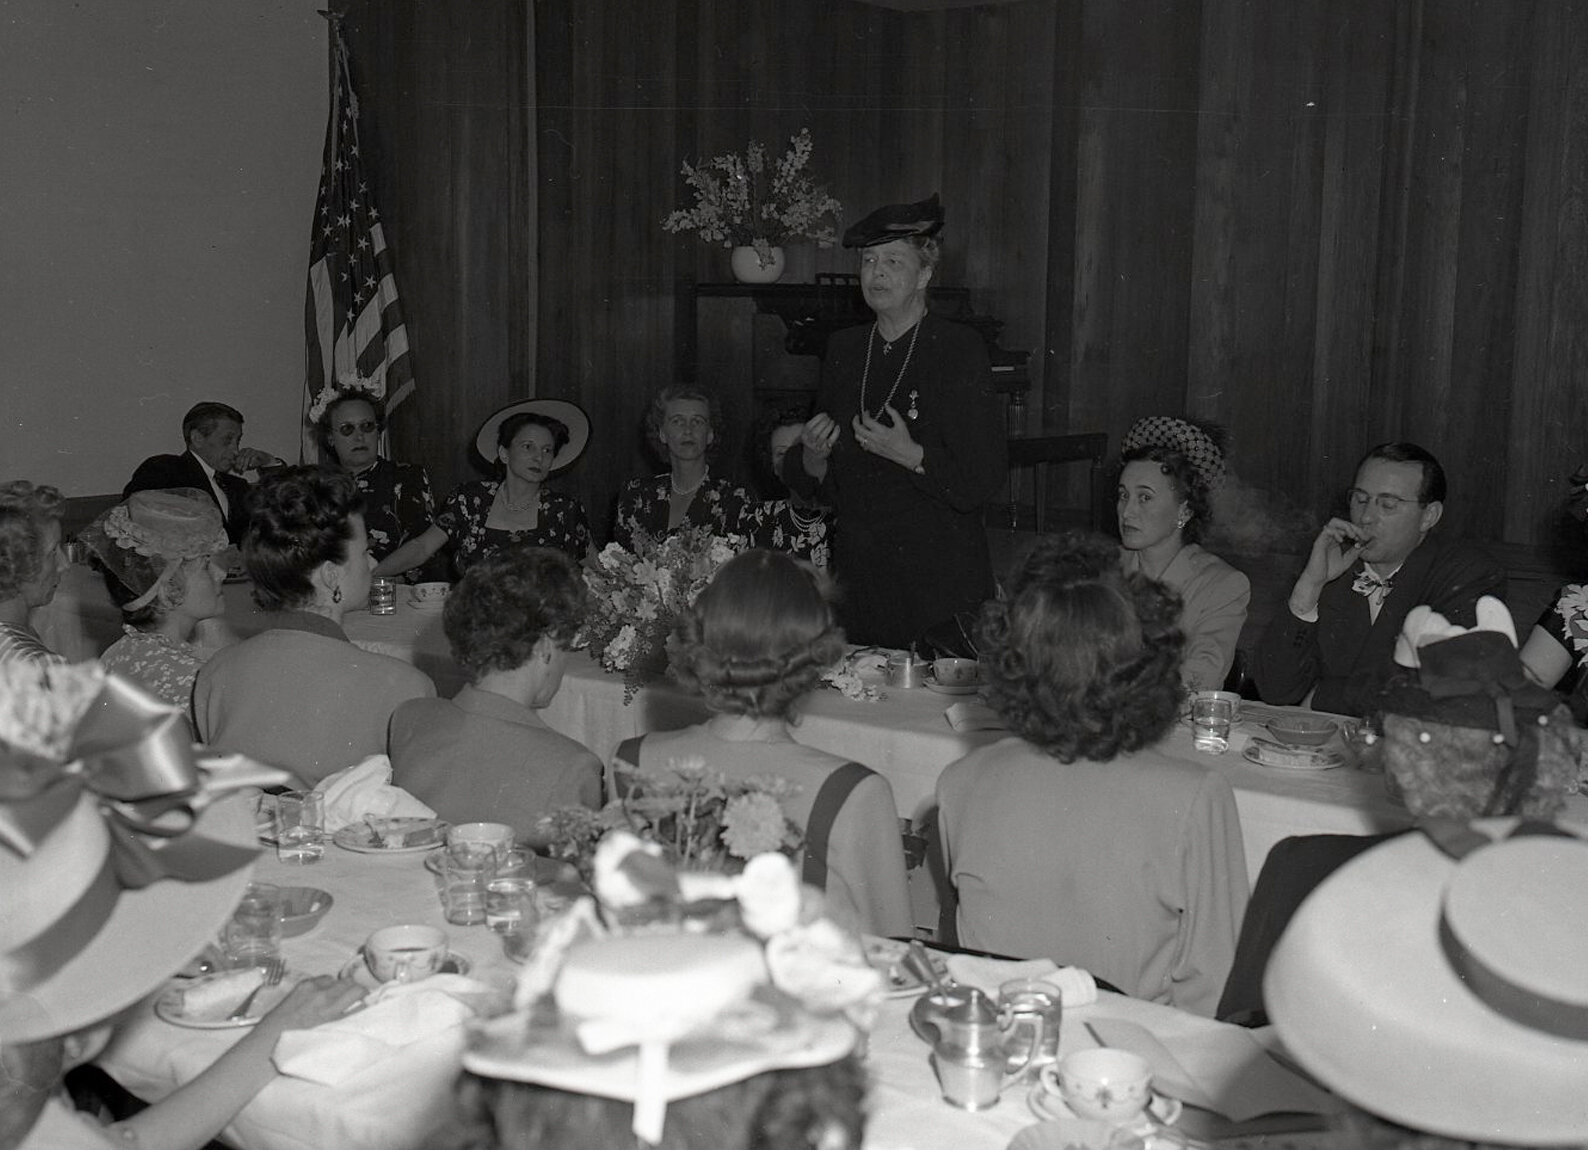 Eleanor Roosevelt speaking at a UJA Federation Dinner in 1947